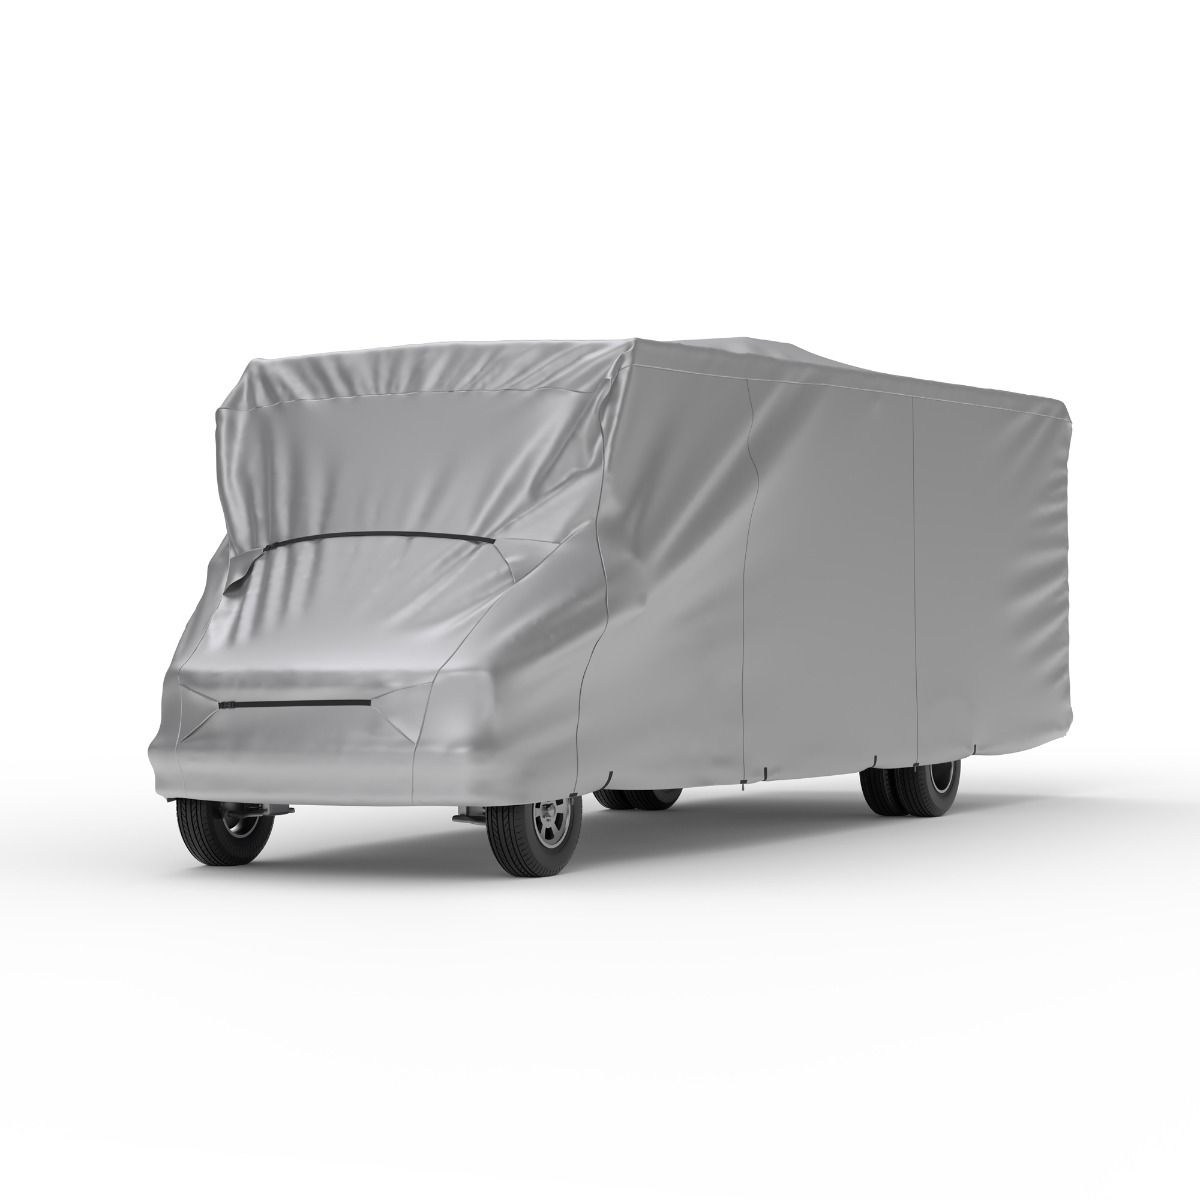 Platinum Shield Class C RV Cover (Fits 20' to 23' Long)